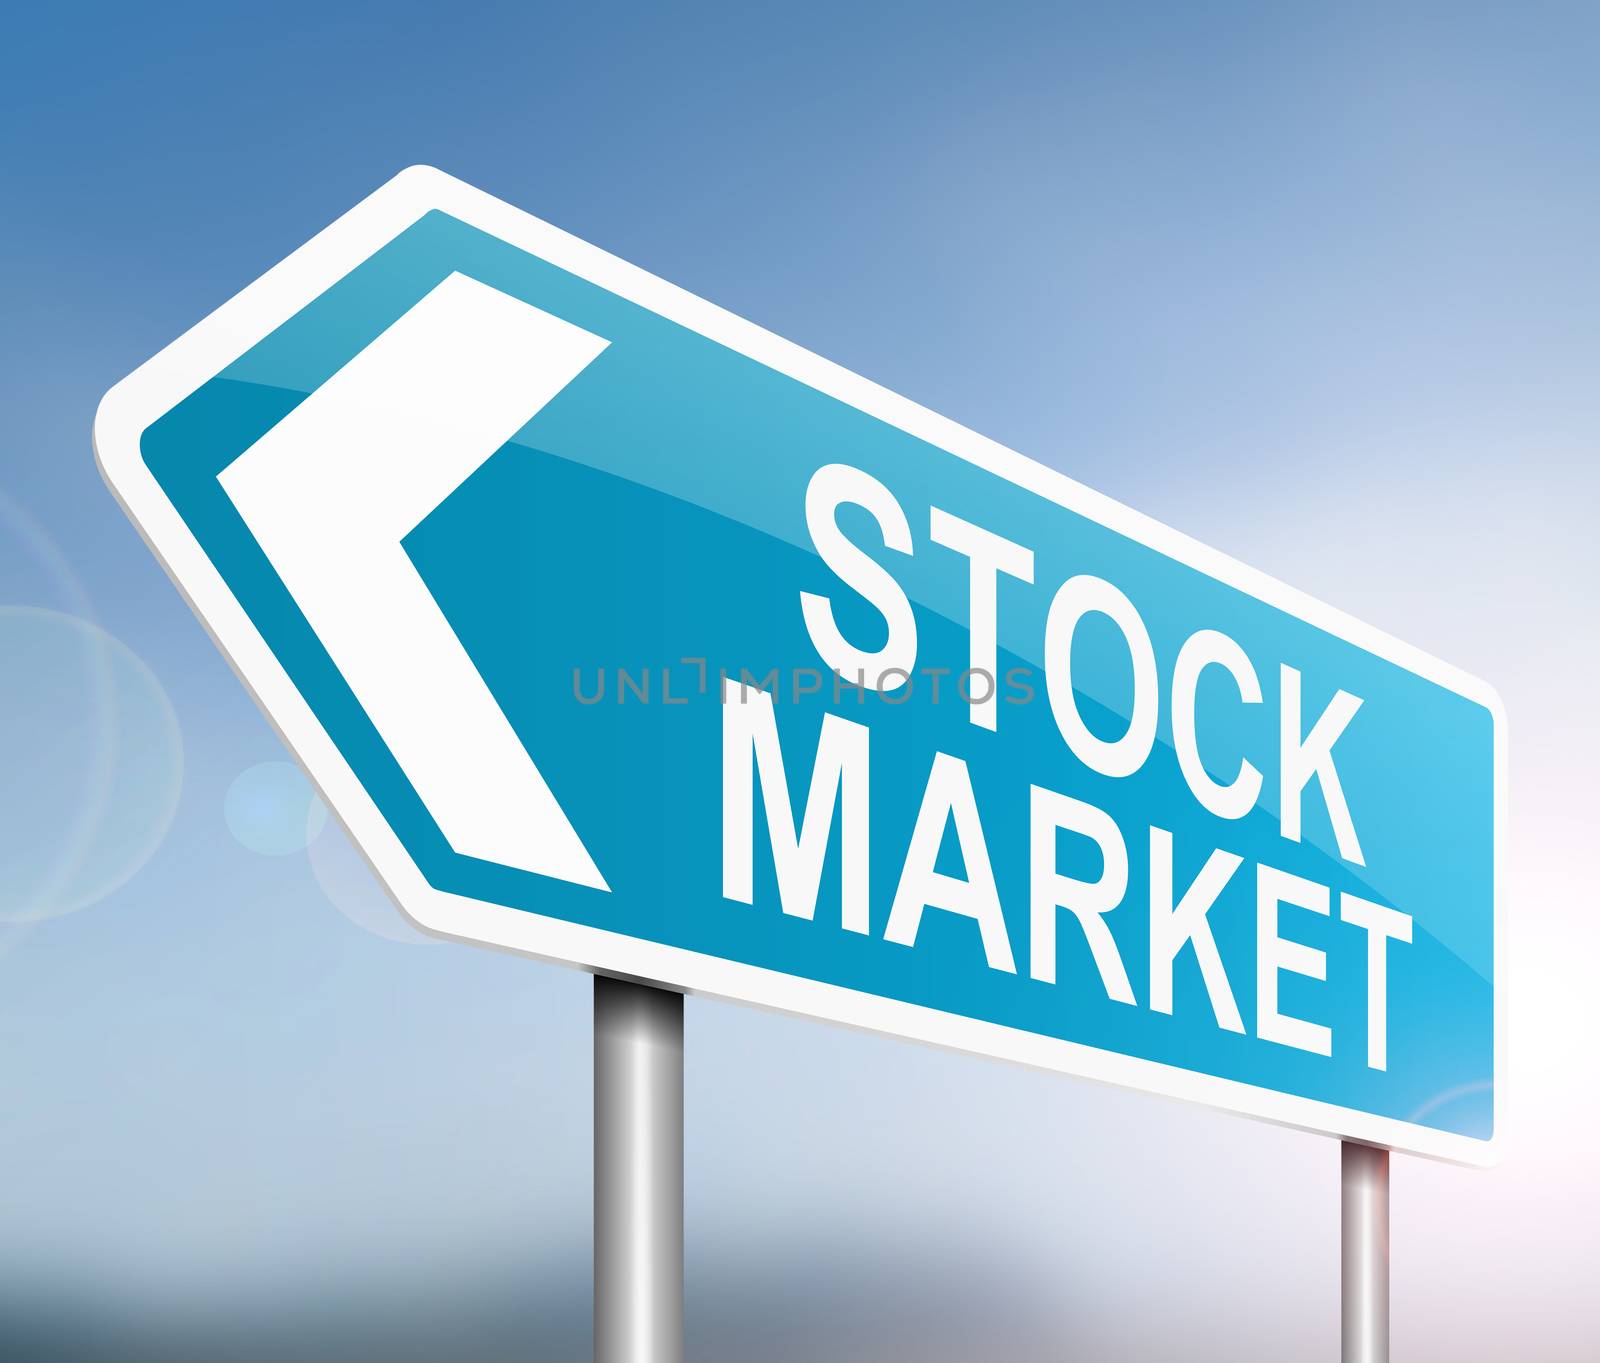 Illustration depicting a sign with a stock market concept.